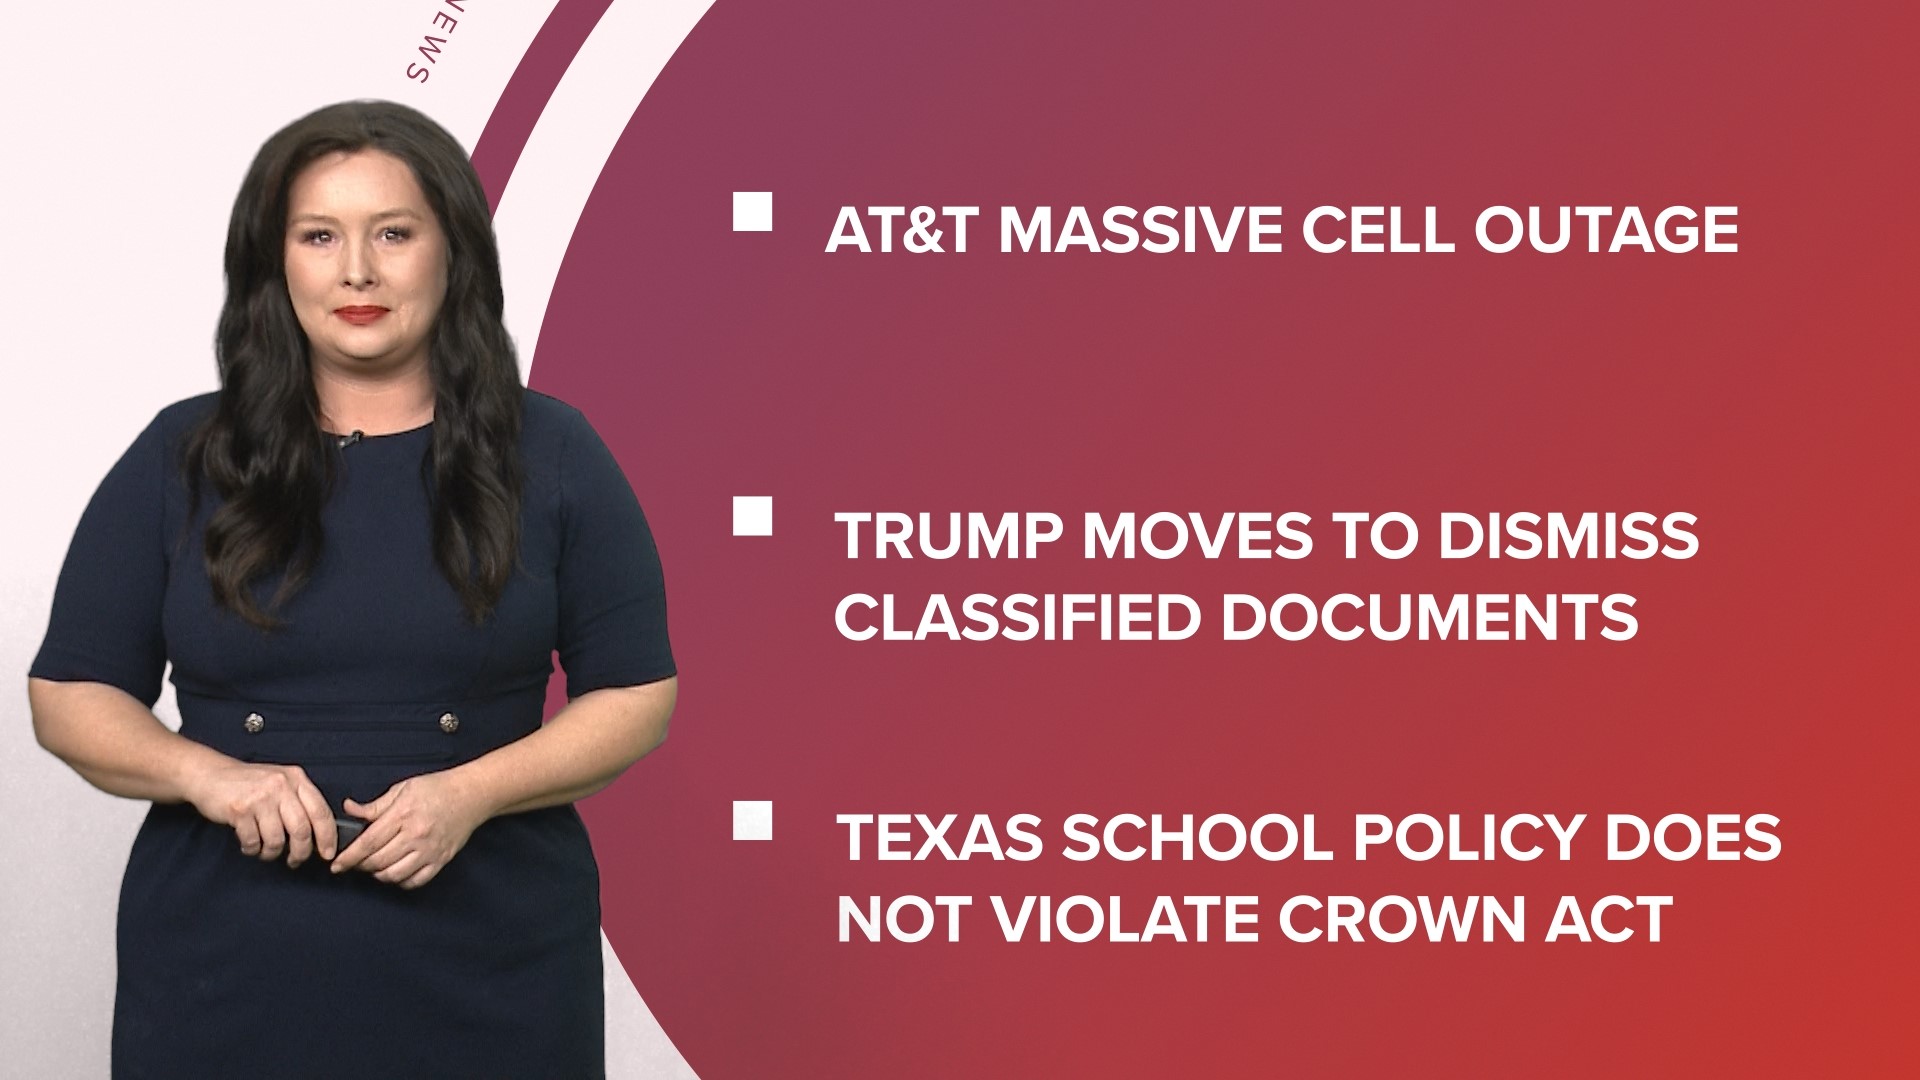 A look at what is happening in the news from the massive AT&T cell outage and a historic moon mission to a ruling in a Texas crown act case.